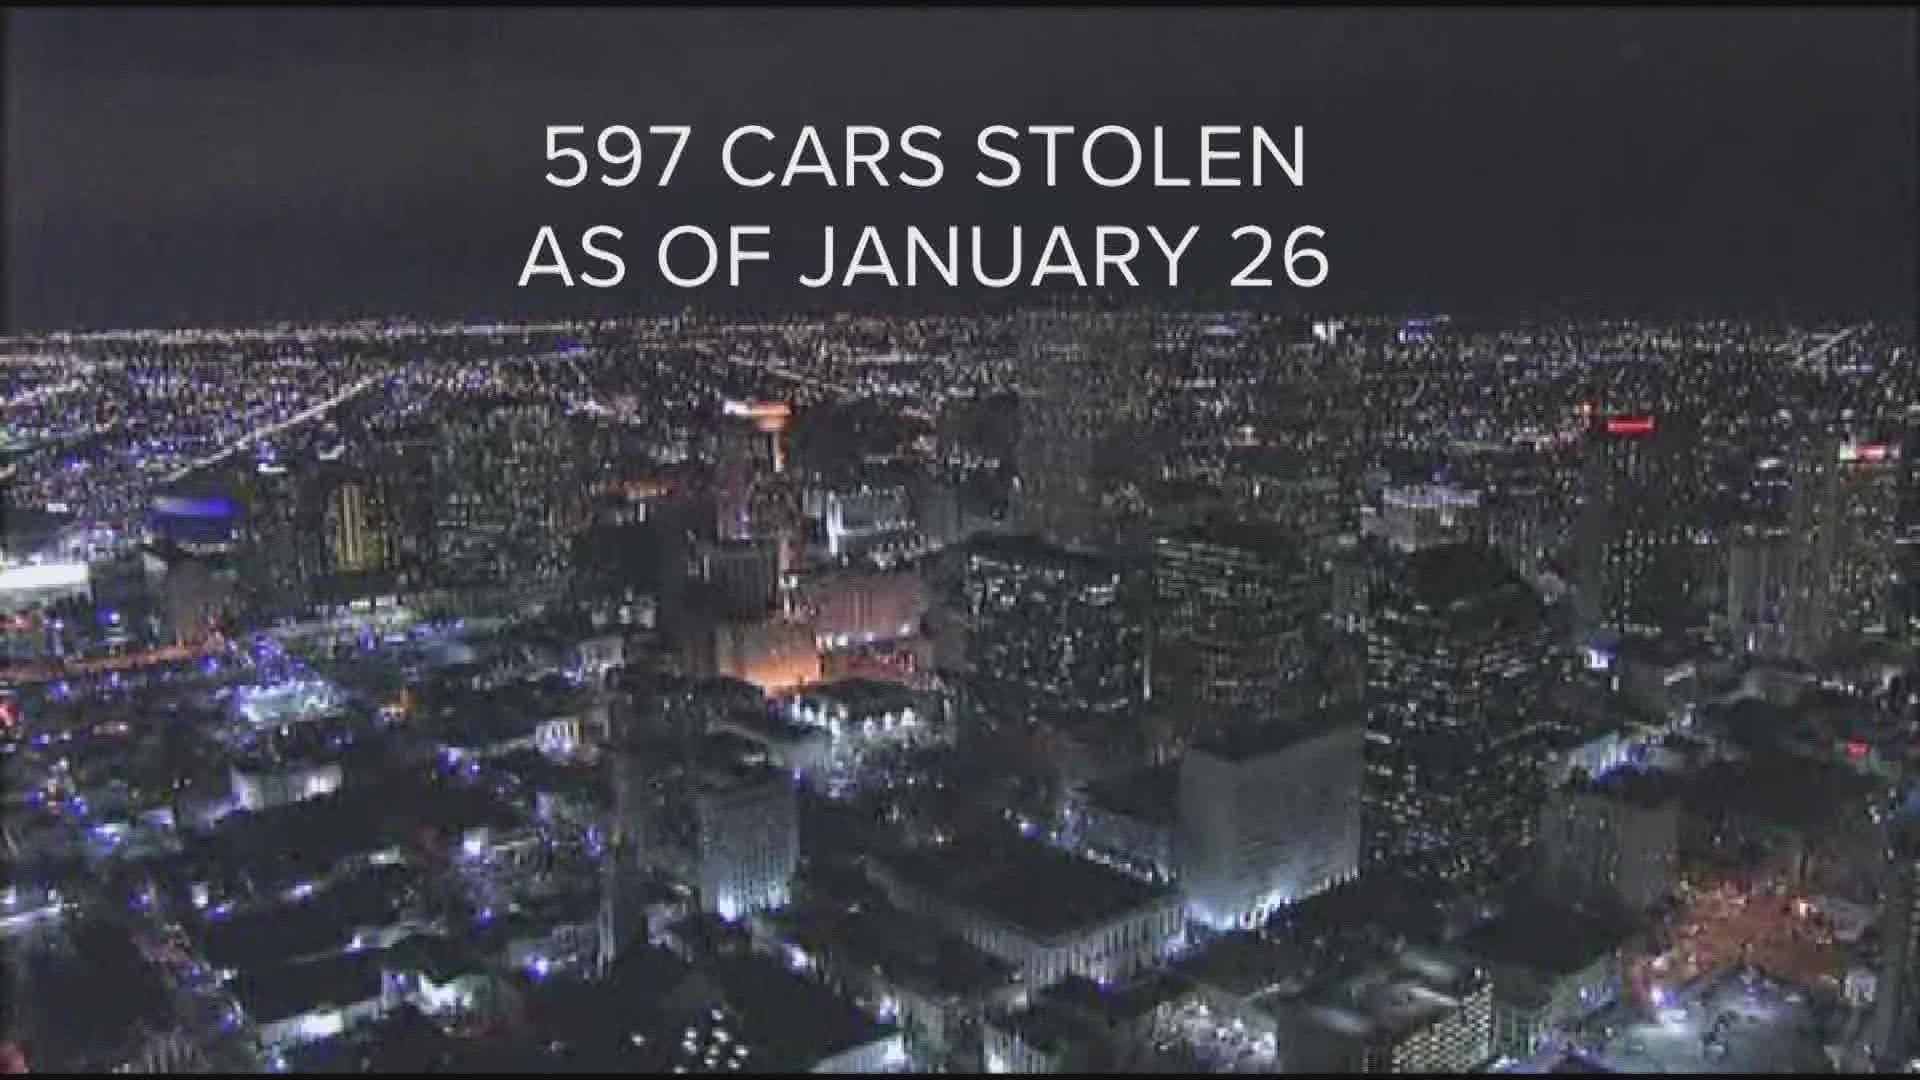 Larger cities like Philadelphia are also seeing a surge in thefts, especially Kia's and Hyundai's.